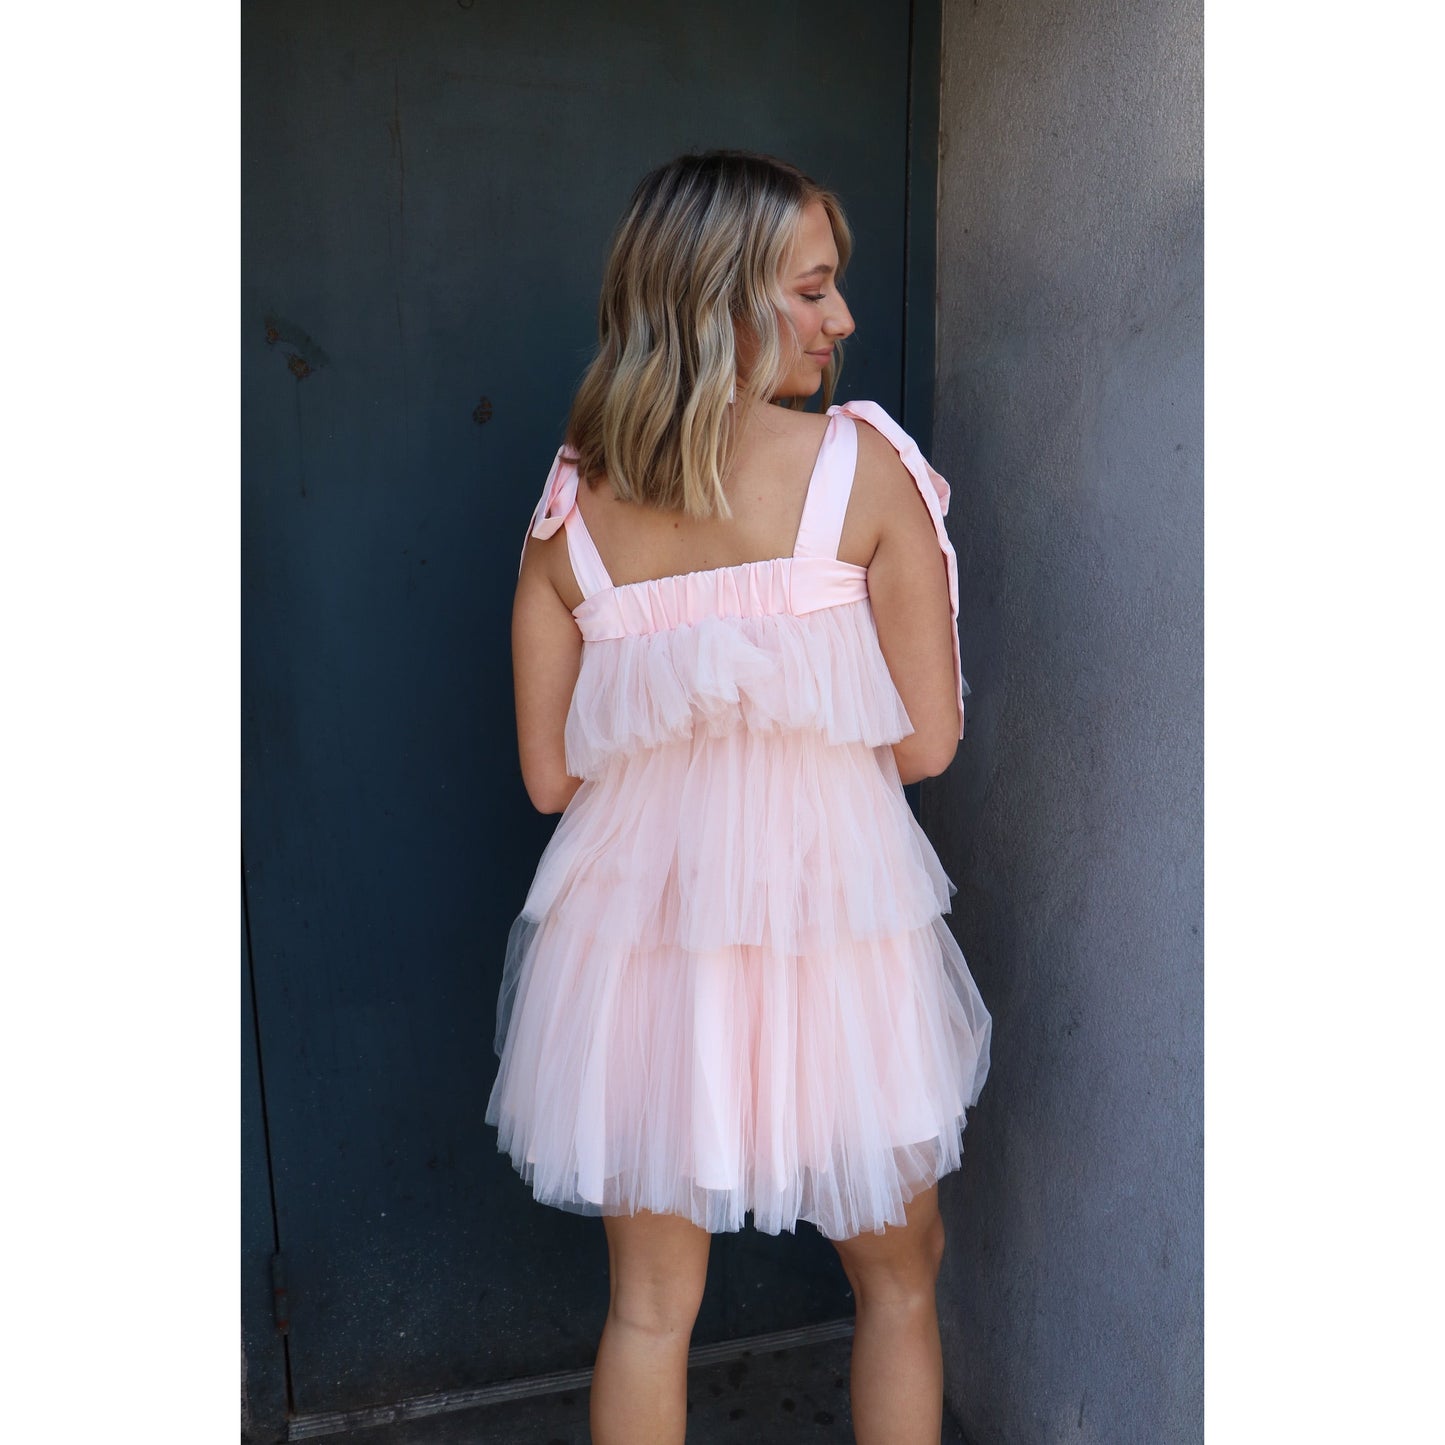 The Tiered Tiara Tulle Dress